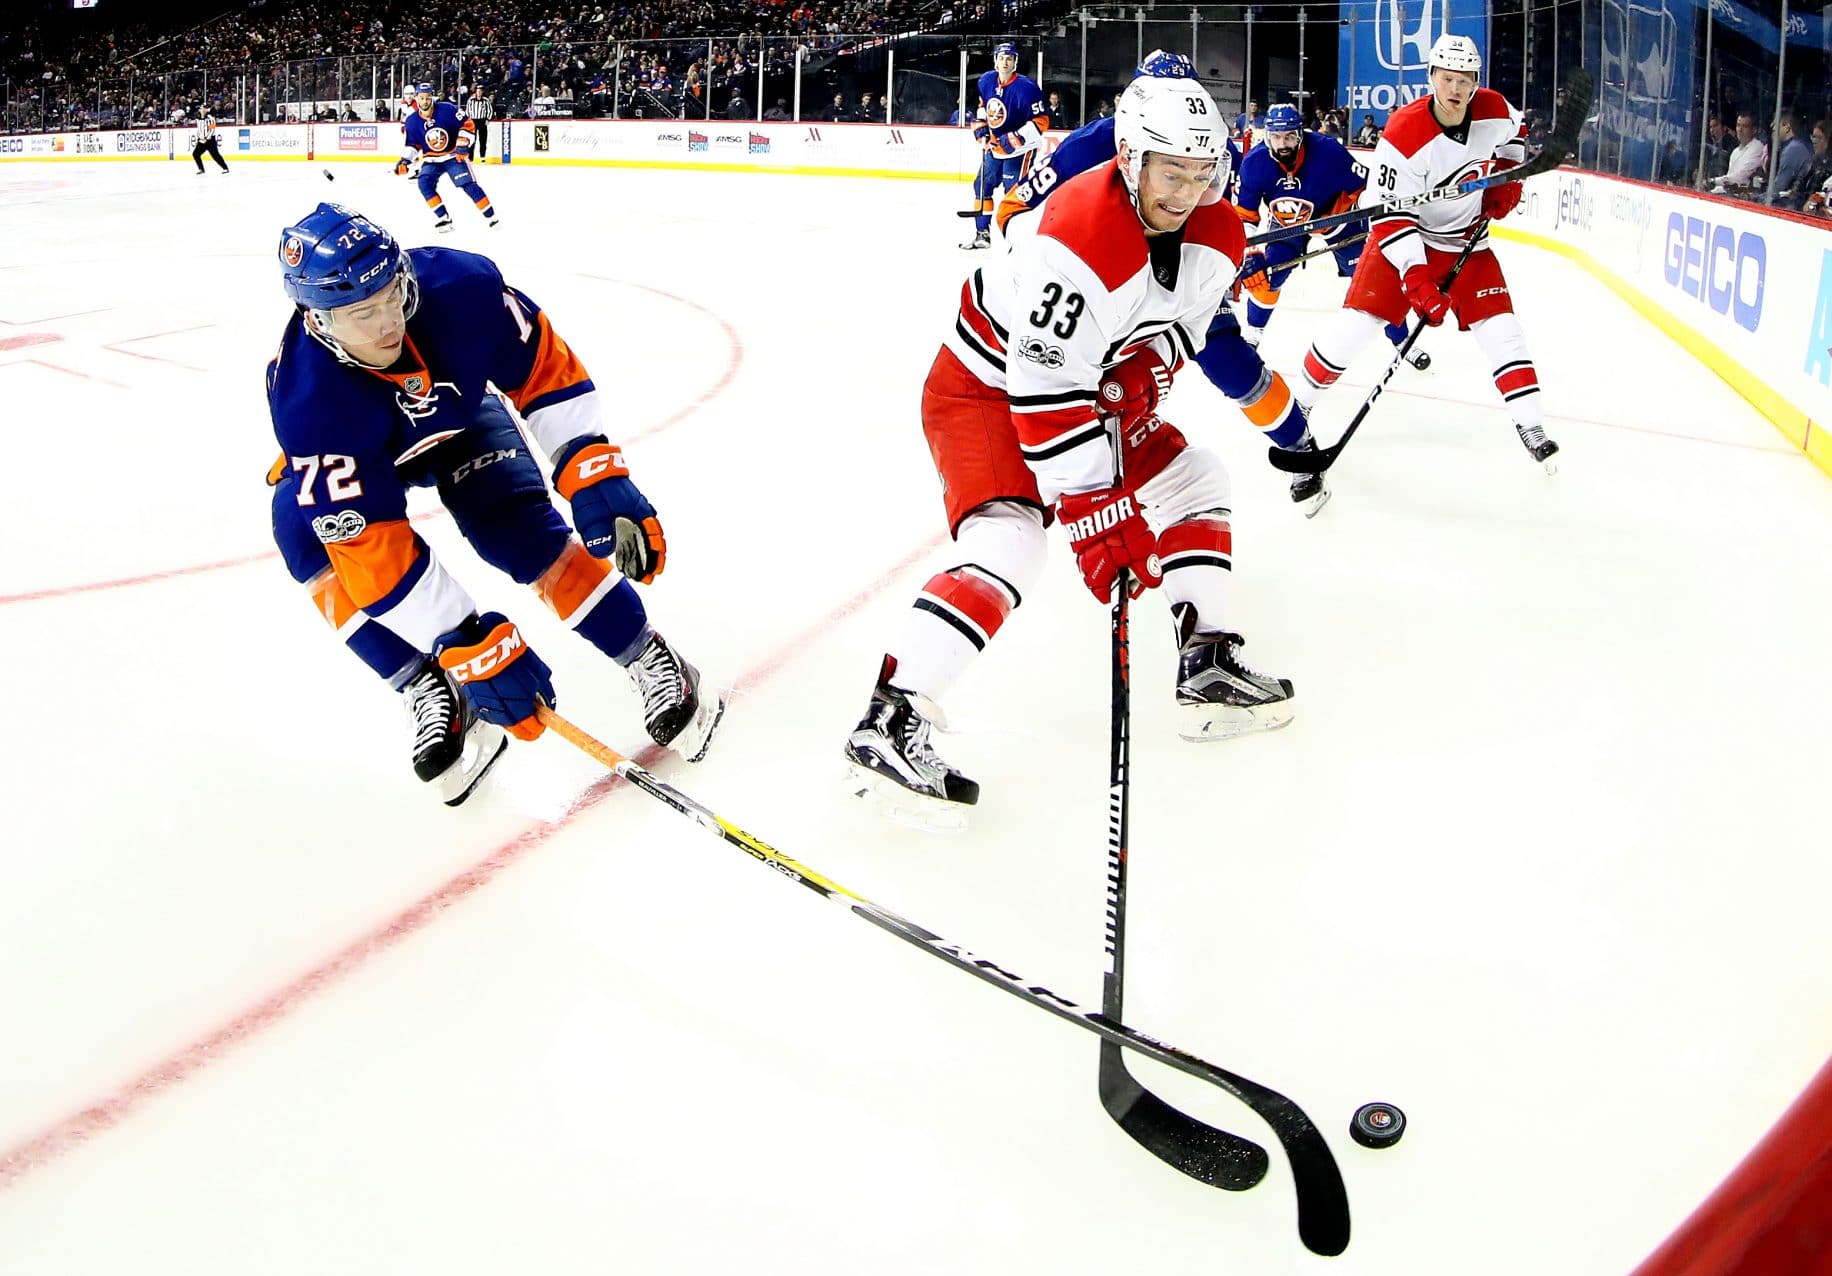 There's A Hurricane Comin' Through: Isles Look To Weather Storm in Brooklyn 